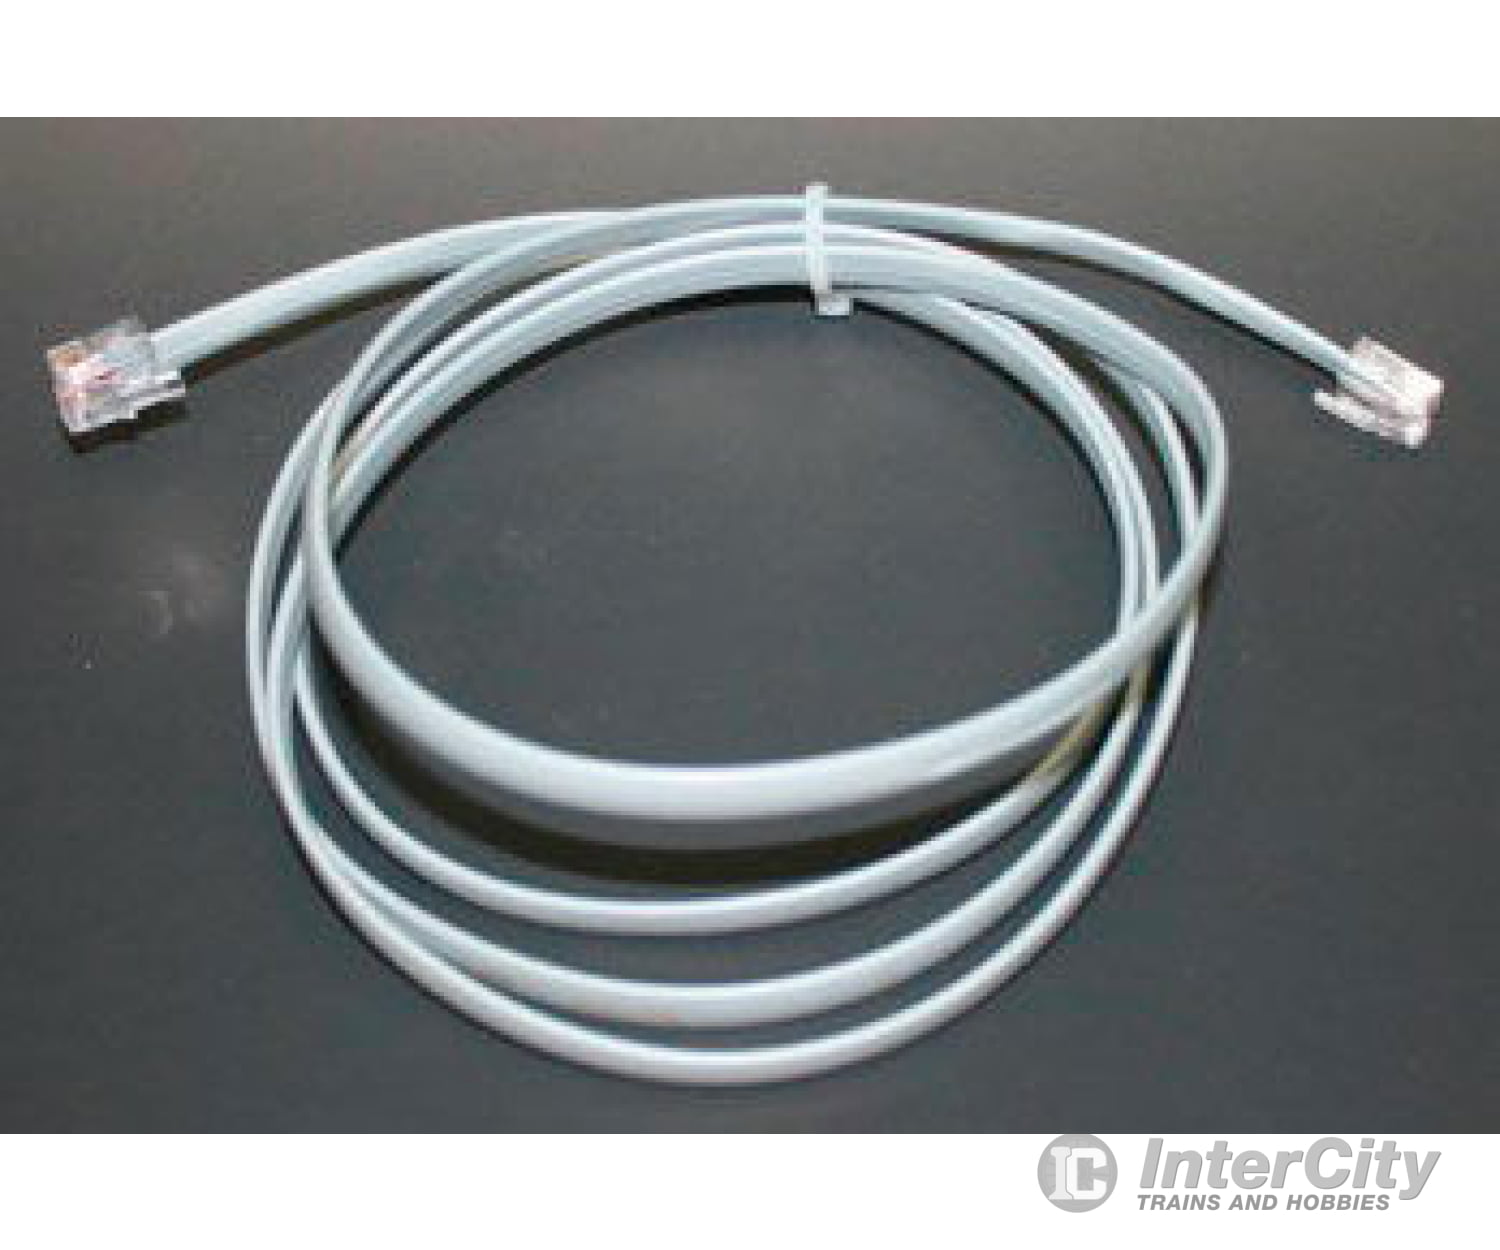 Accu Lites A 2002 Loconet/Nce Cable - - 2’.61M Dcc Accessories